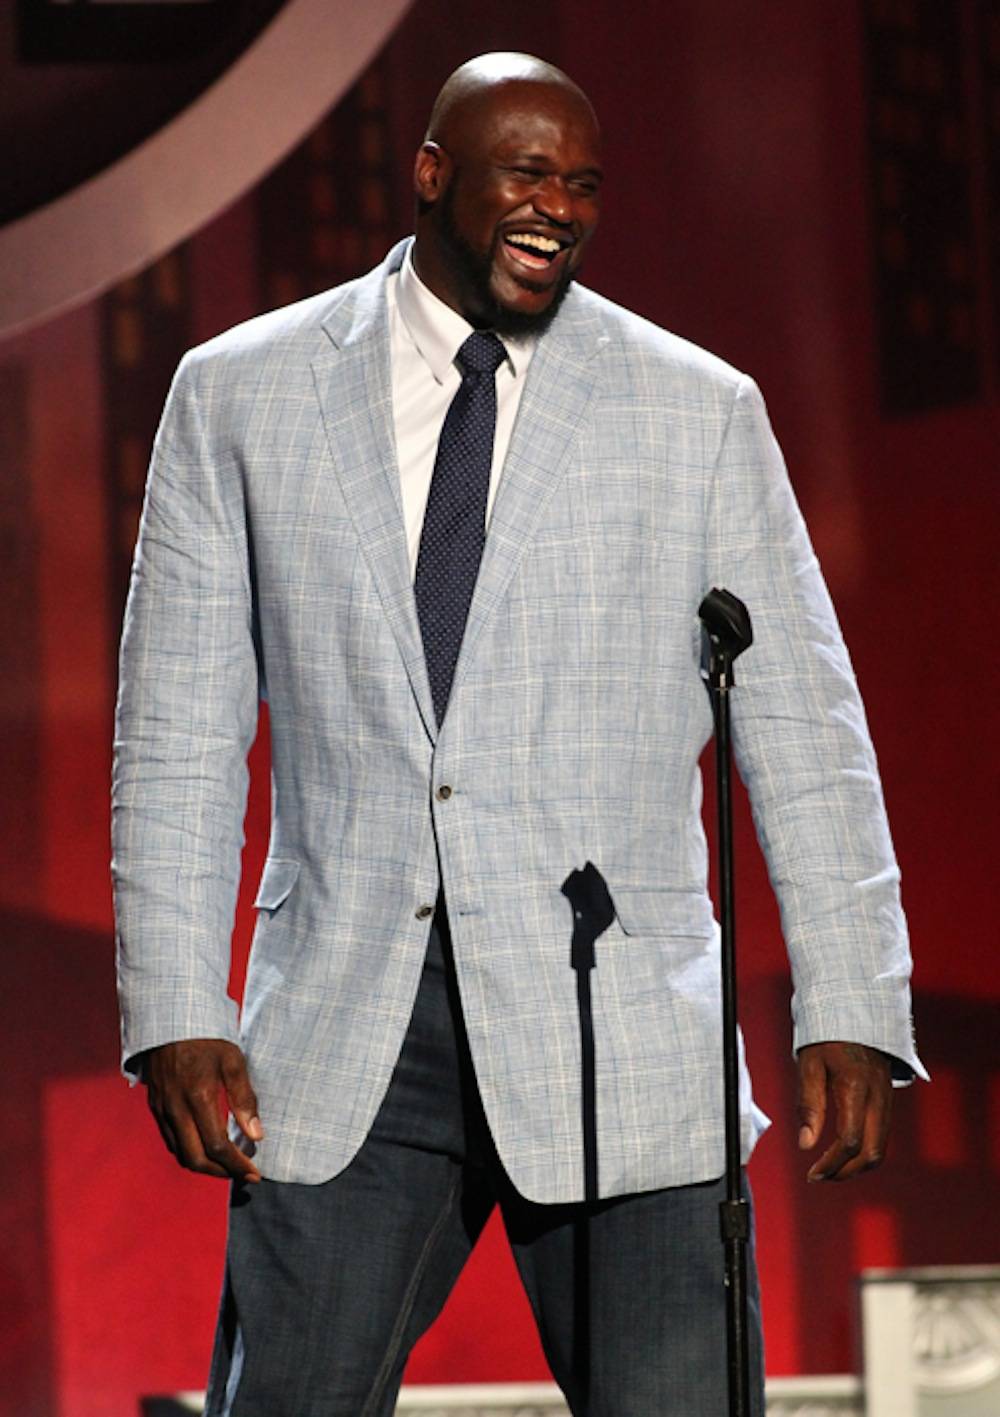 Shaquille O’Neal All Star Comedy Jam at TheJoint on Saturday, Aug. 31